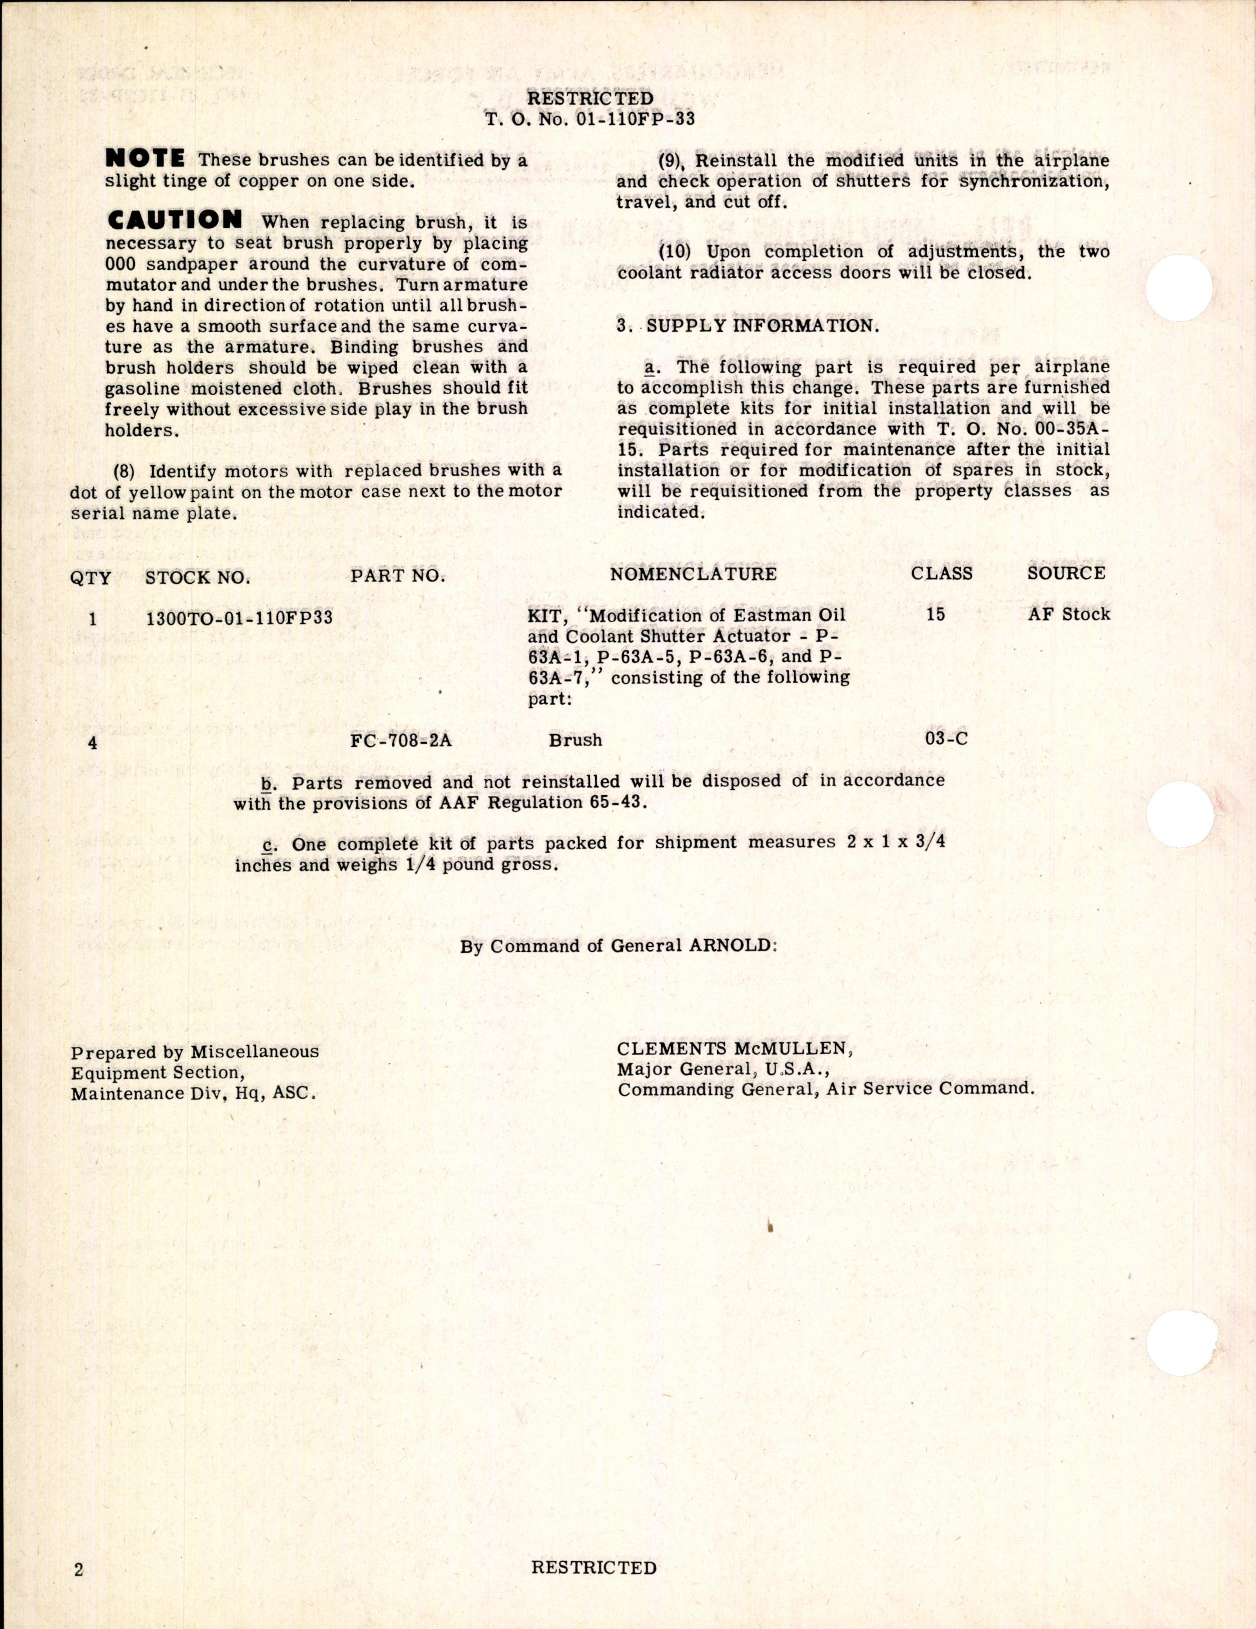 Sample page 2 from AirCorps Library document: Modification of Eastman Oil & Coolant Shutter Actuators